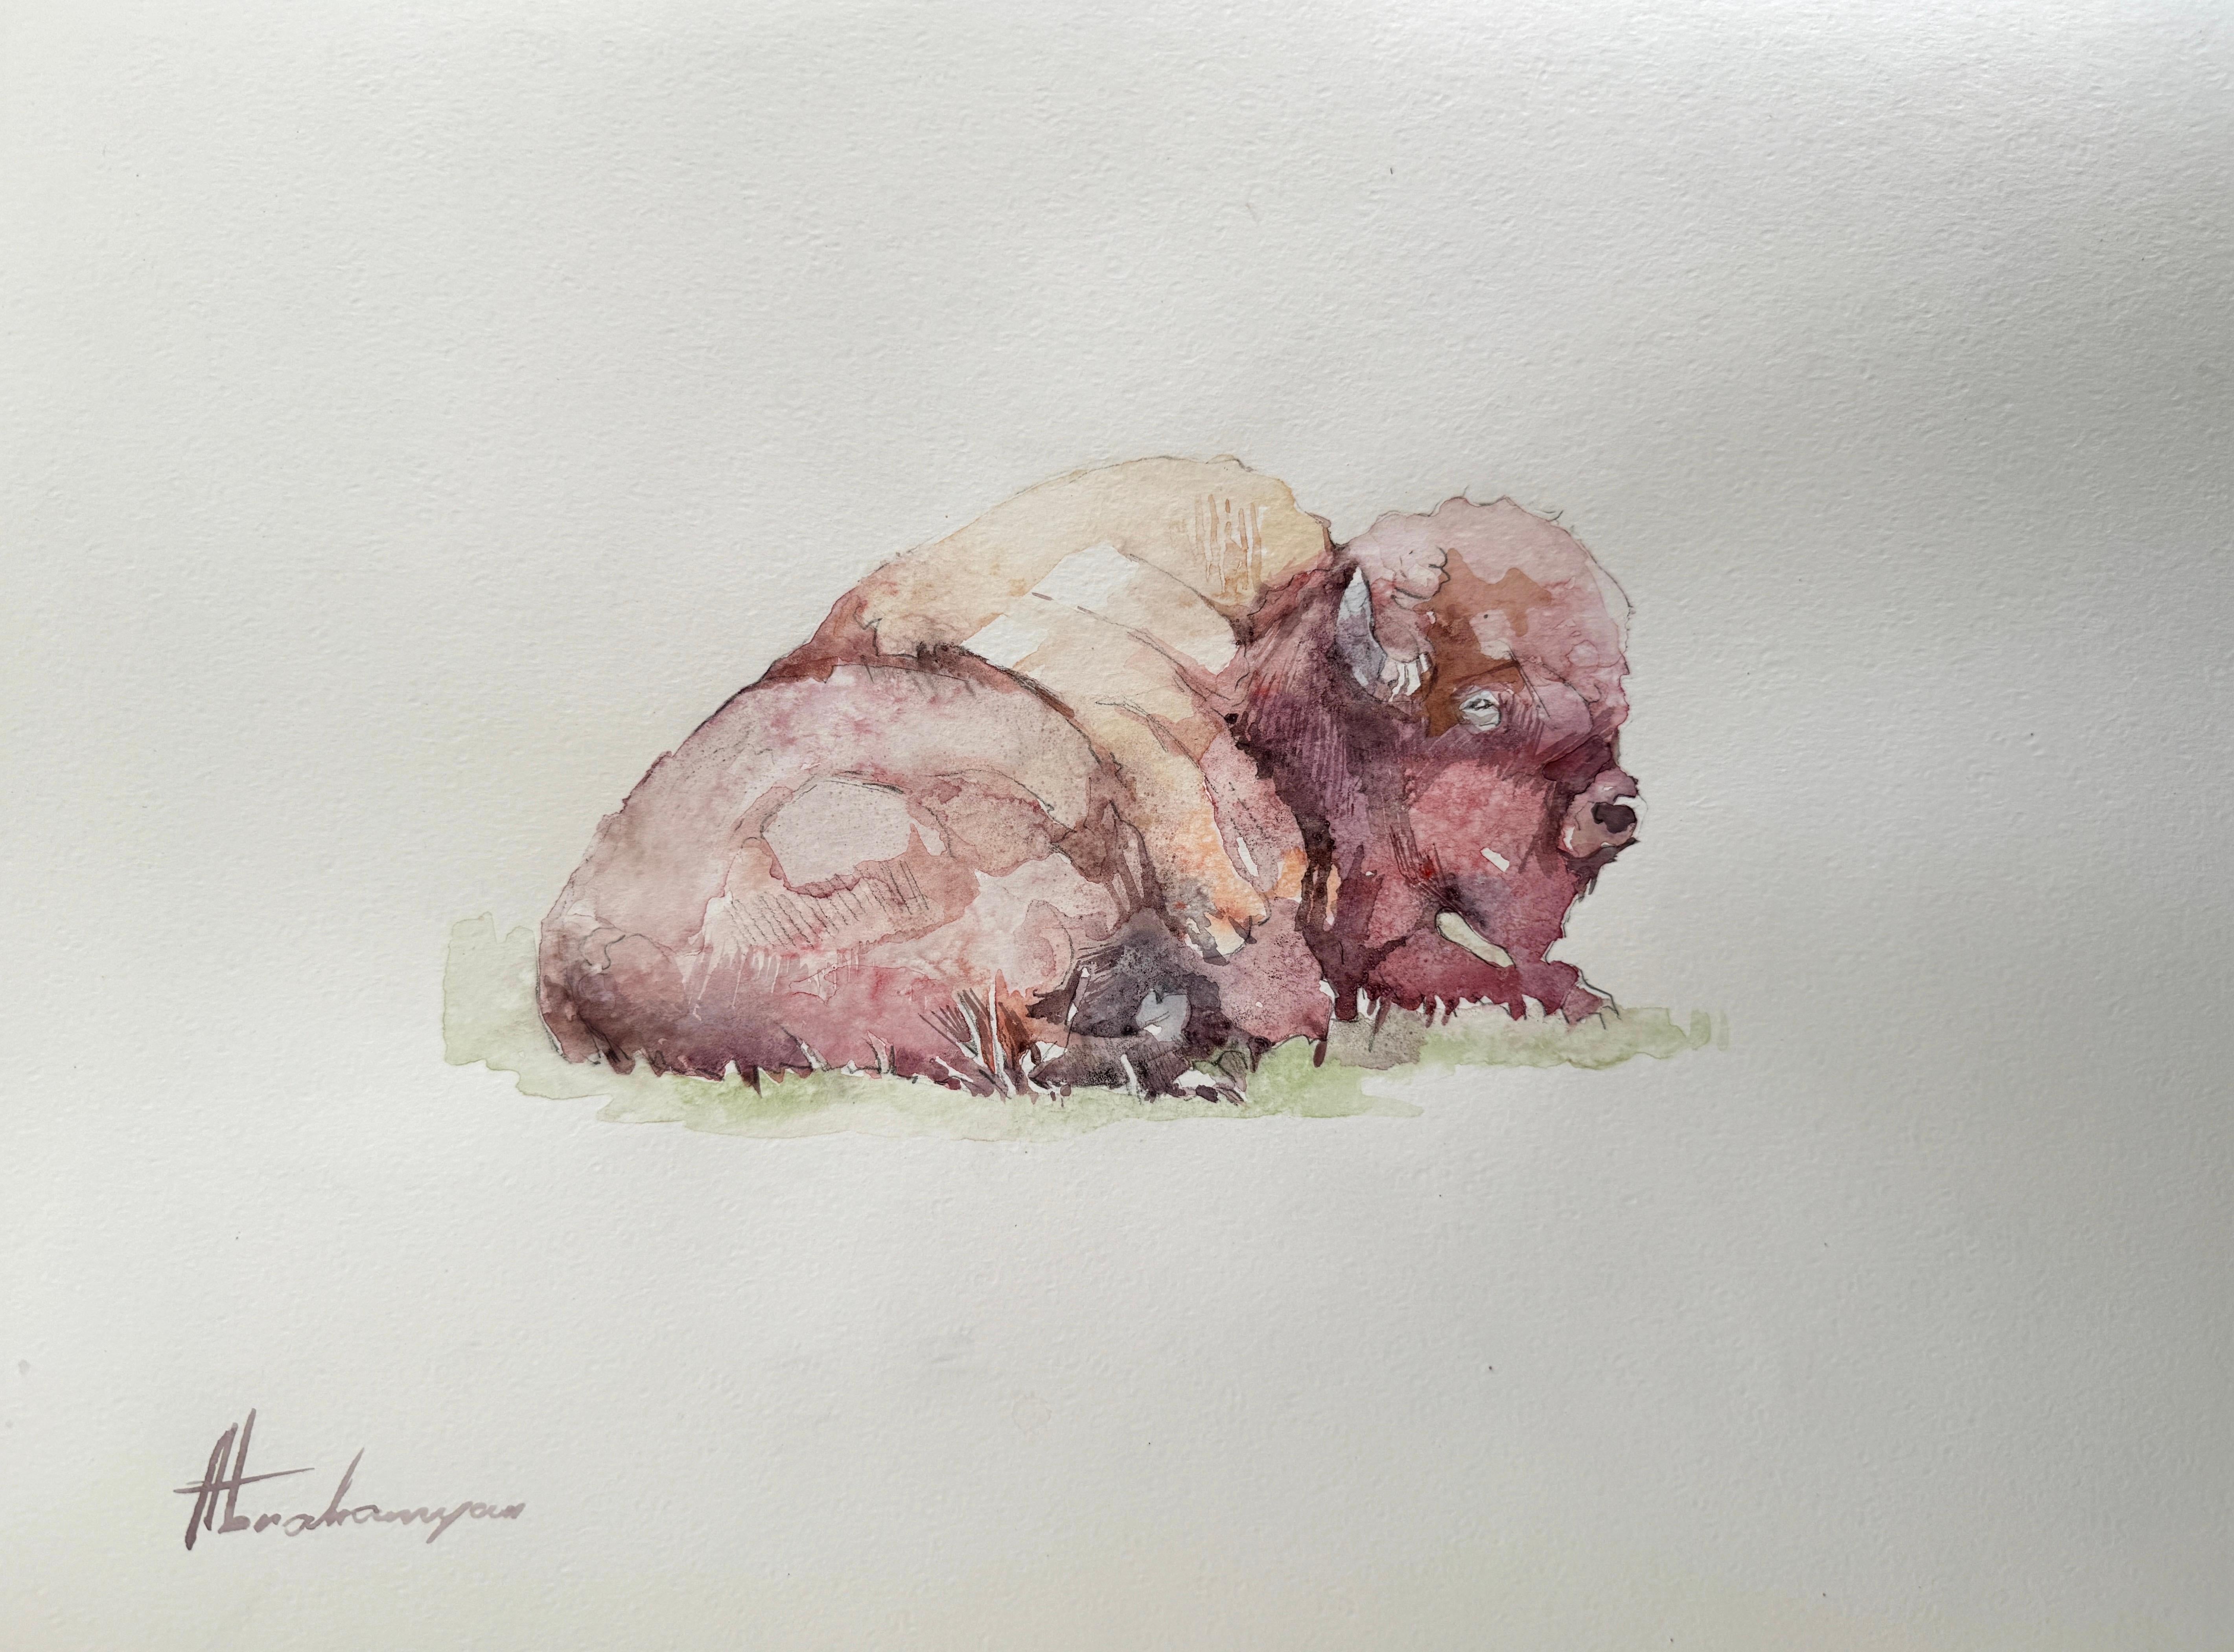 Artyom Abrahamyan Animal Art - Bison, Watercolor Handmade Painting, One of a Kind